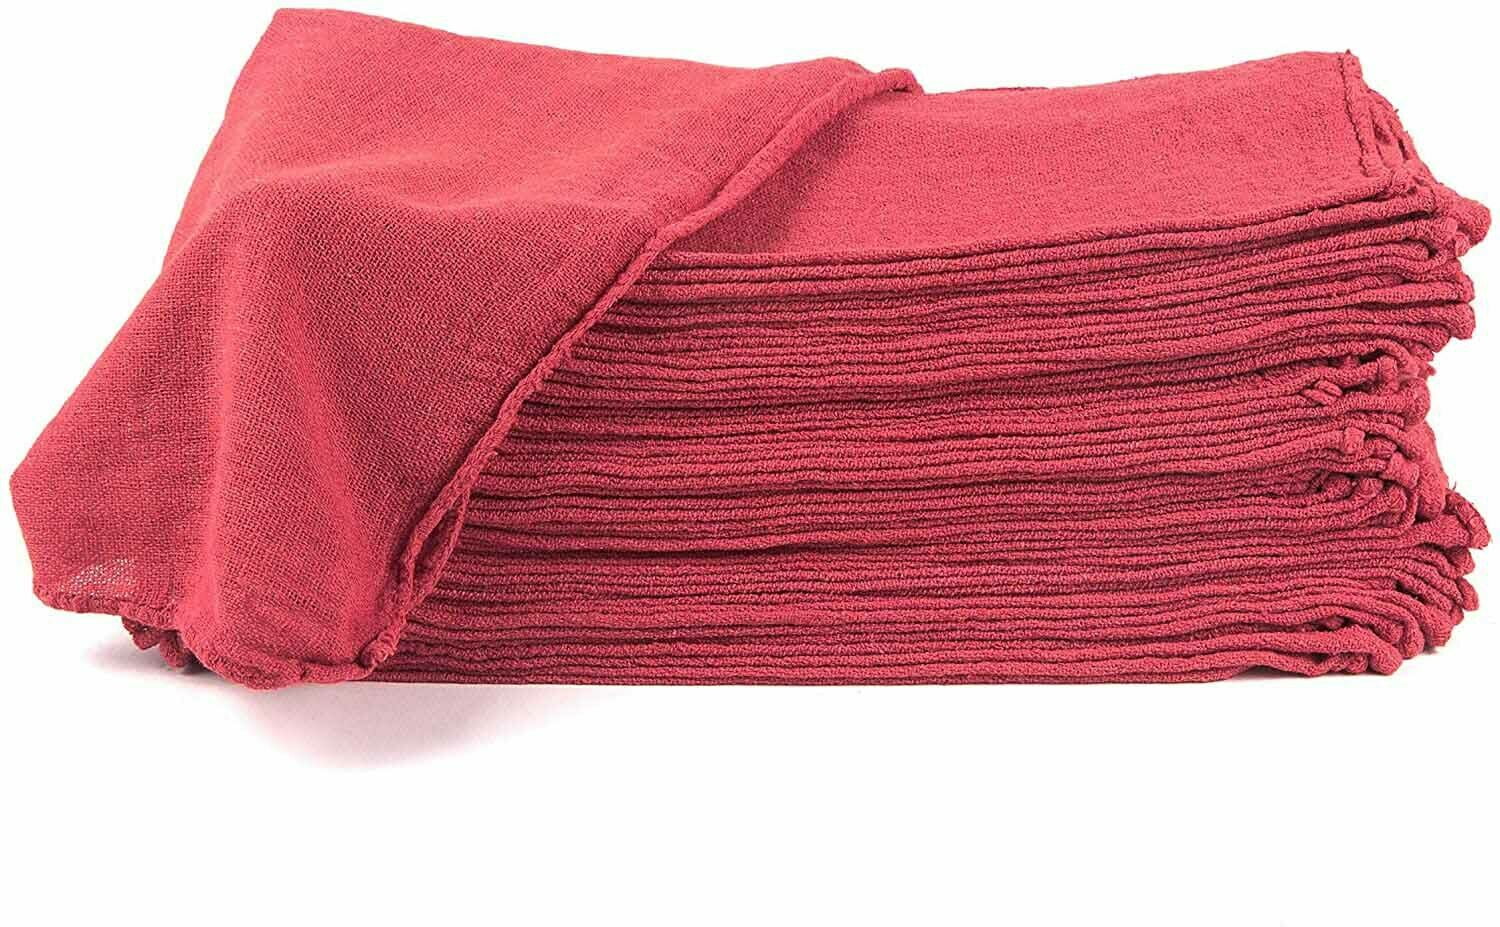 50 PACK MECHANIC AUTO SHOP RAG CLEANING TOWELS RED COMMERCIAL NEW 